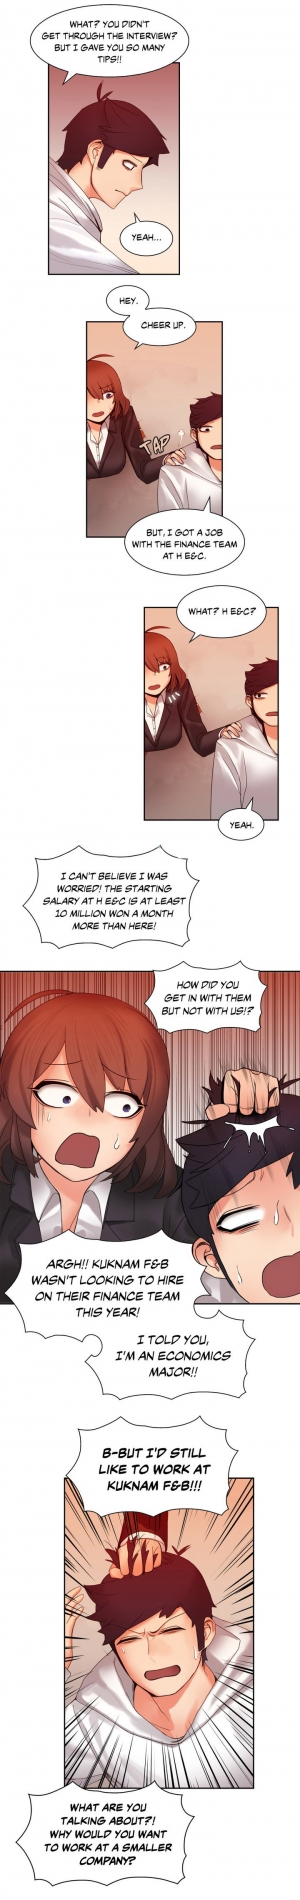 [Gaehoju, Gunnermul] The Girl That Got Stuck in the Wall Ch.11/11 [COMPLETED] [English] [Hentai Universe] - Page 111